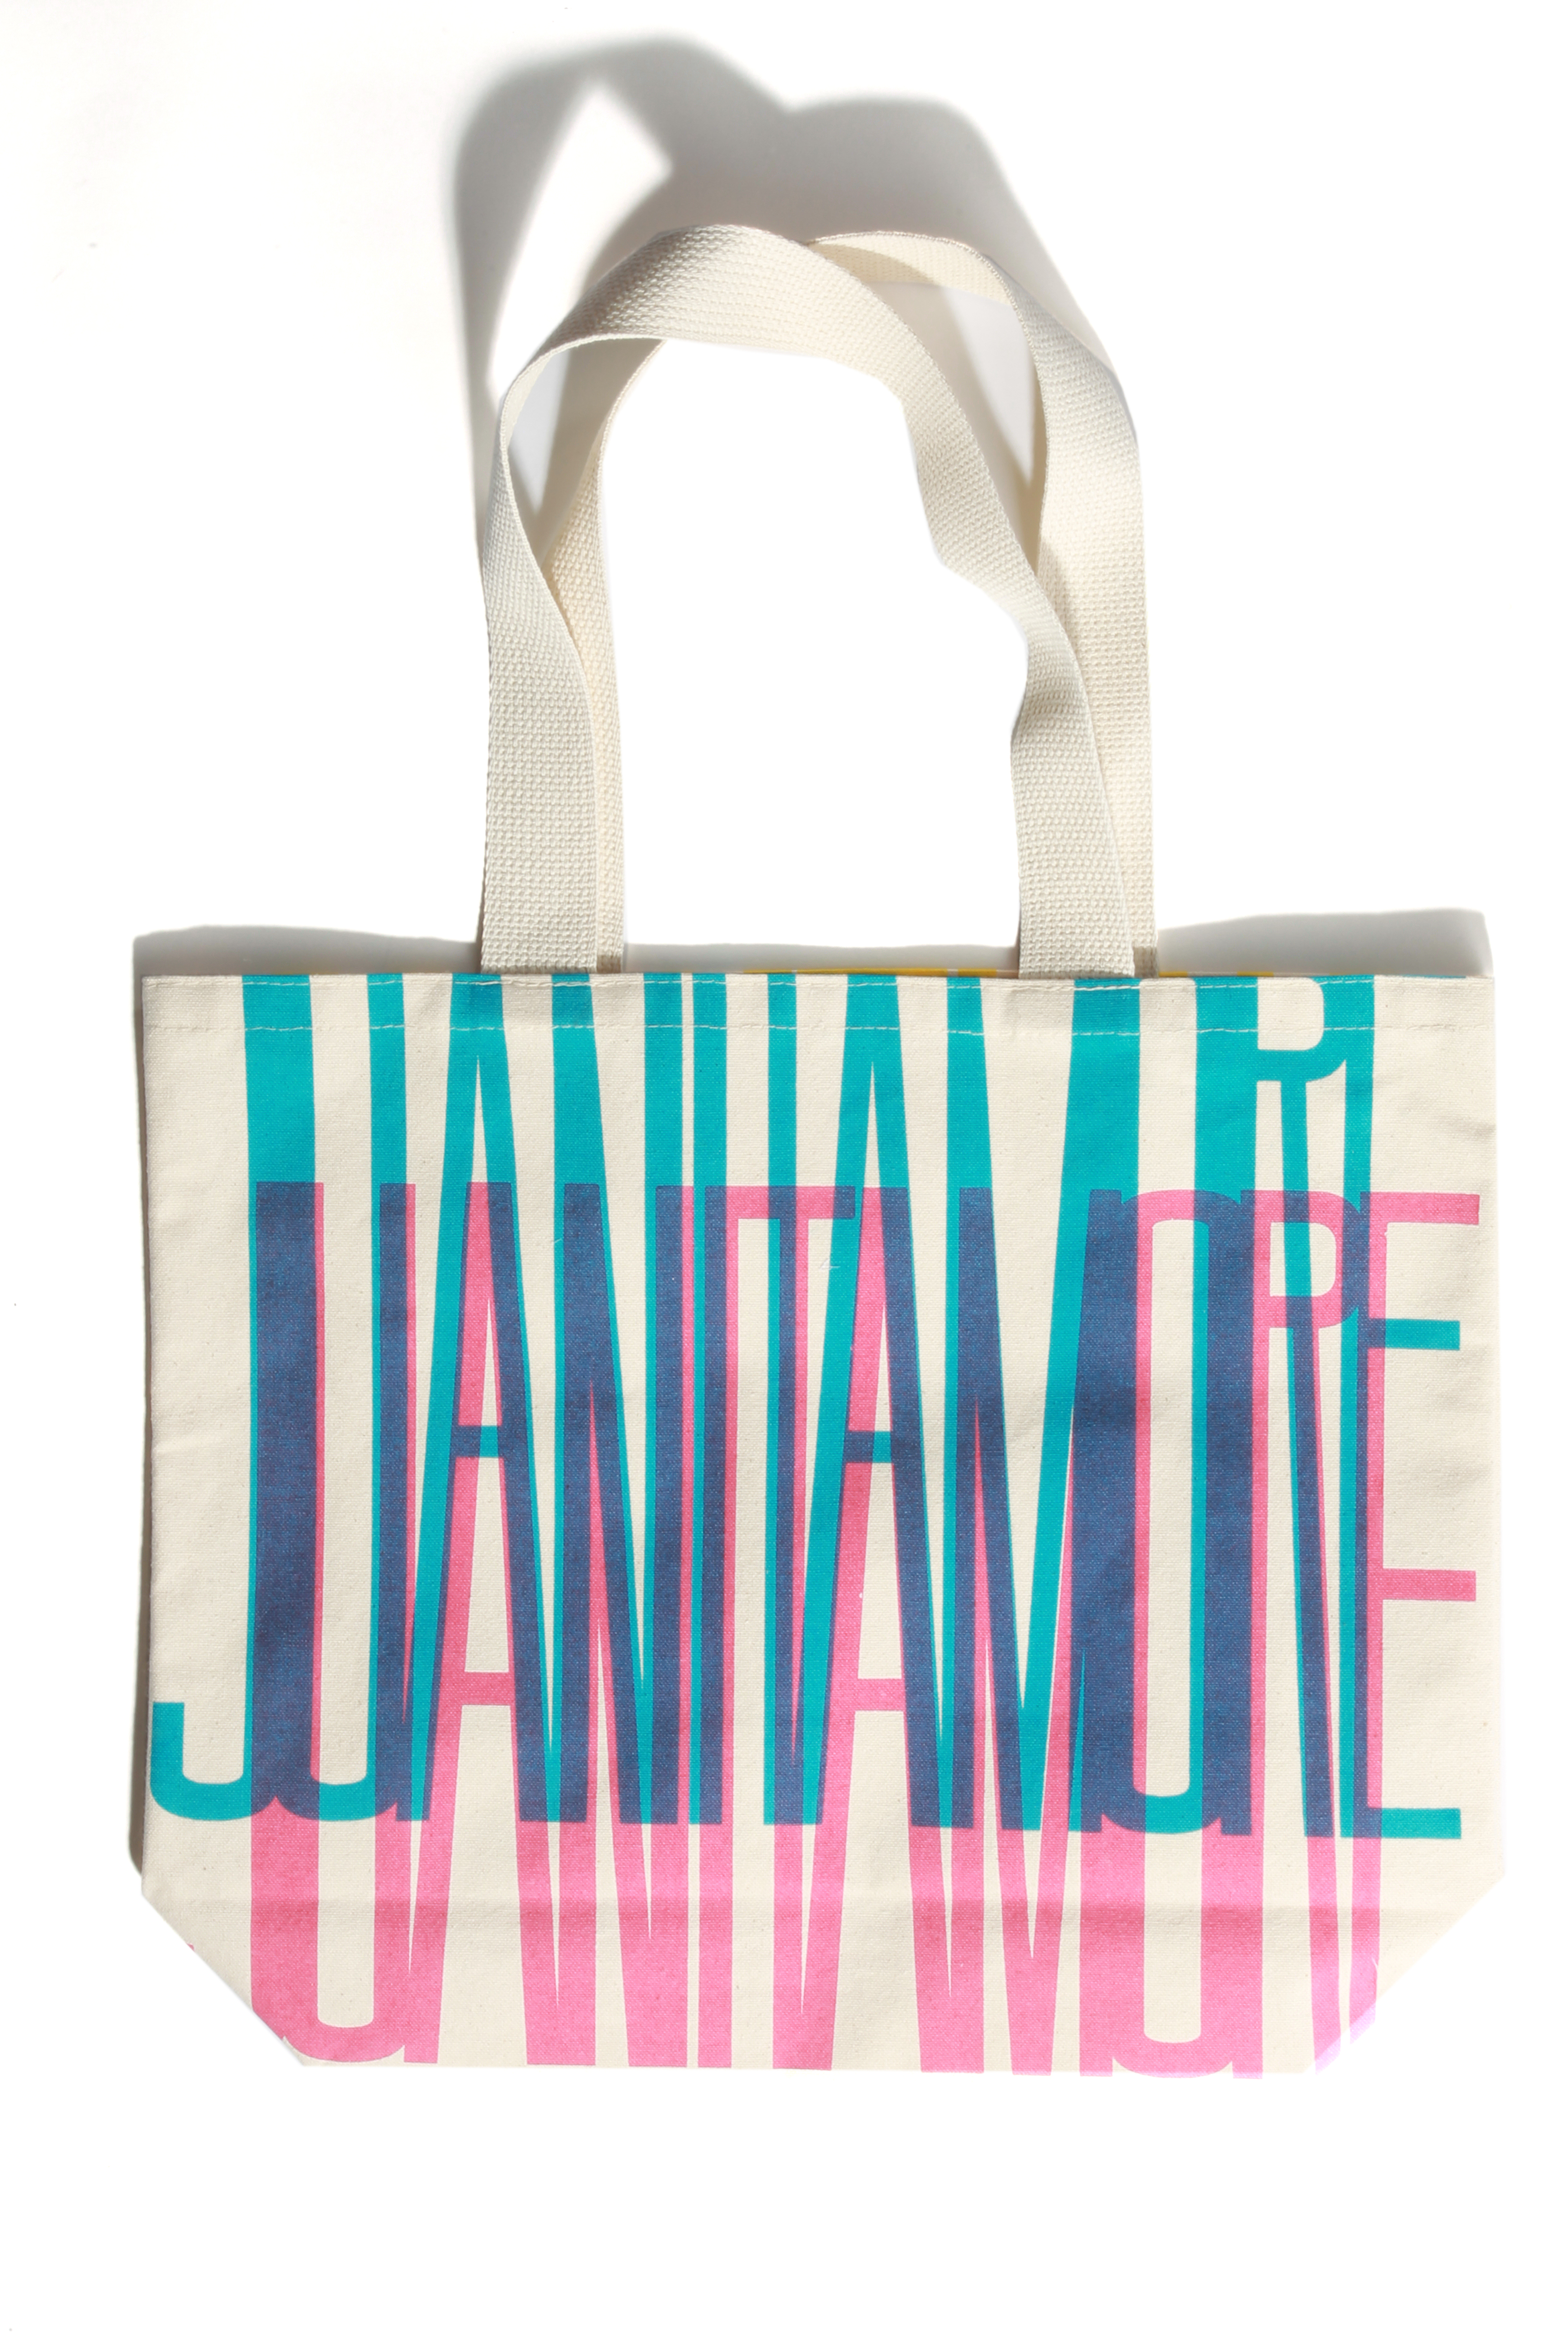 A winning tote, designed by Jiawei Tang. Photo by Bob Toy.